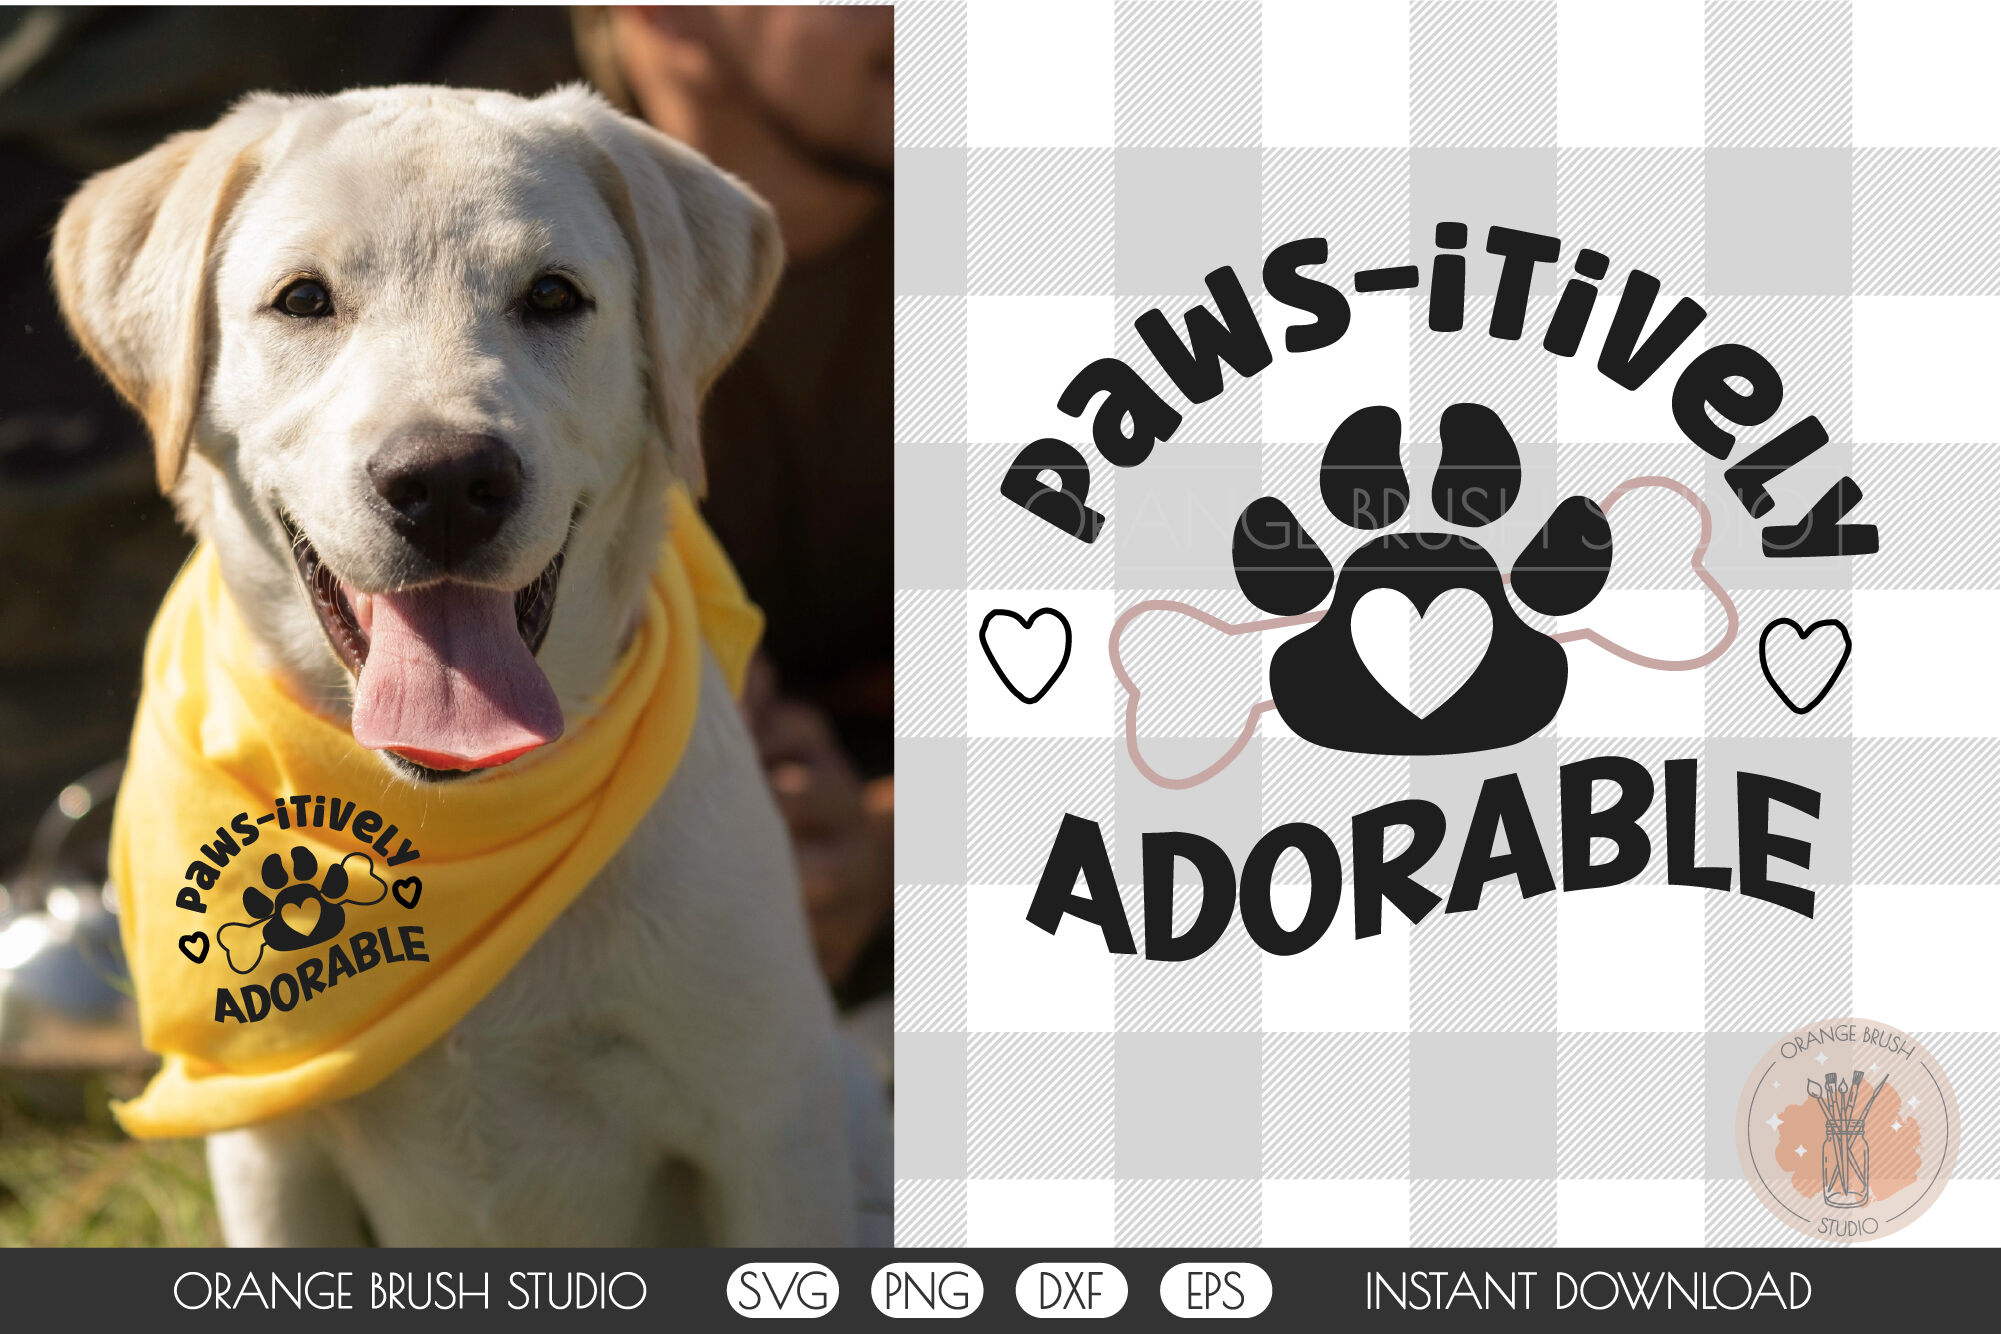 How to Customize Dog Bandanas with Cricut or Silhouette